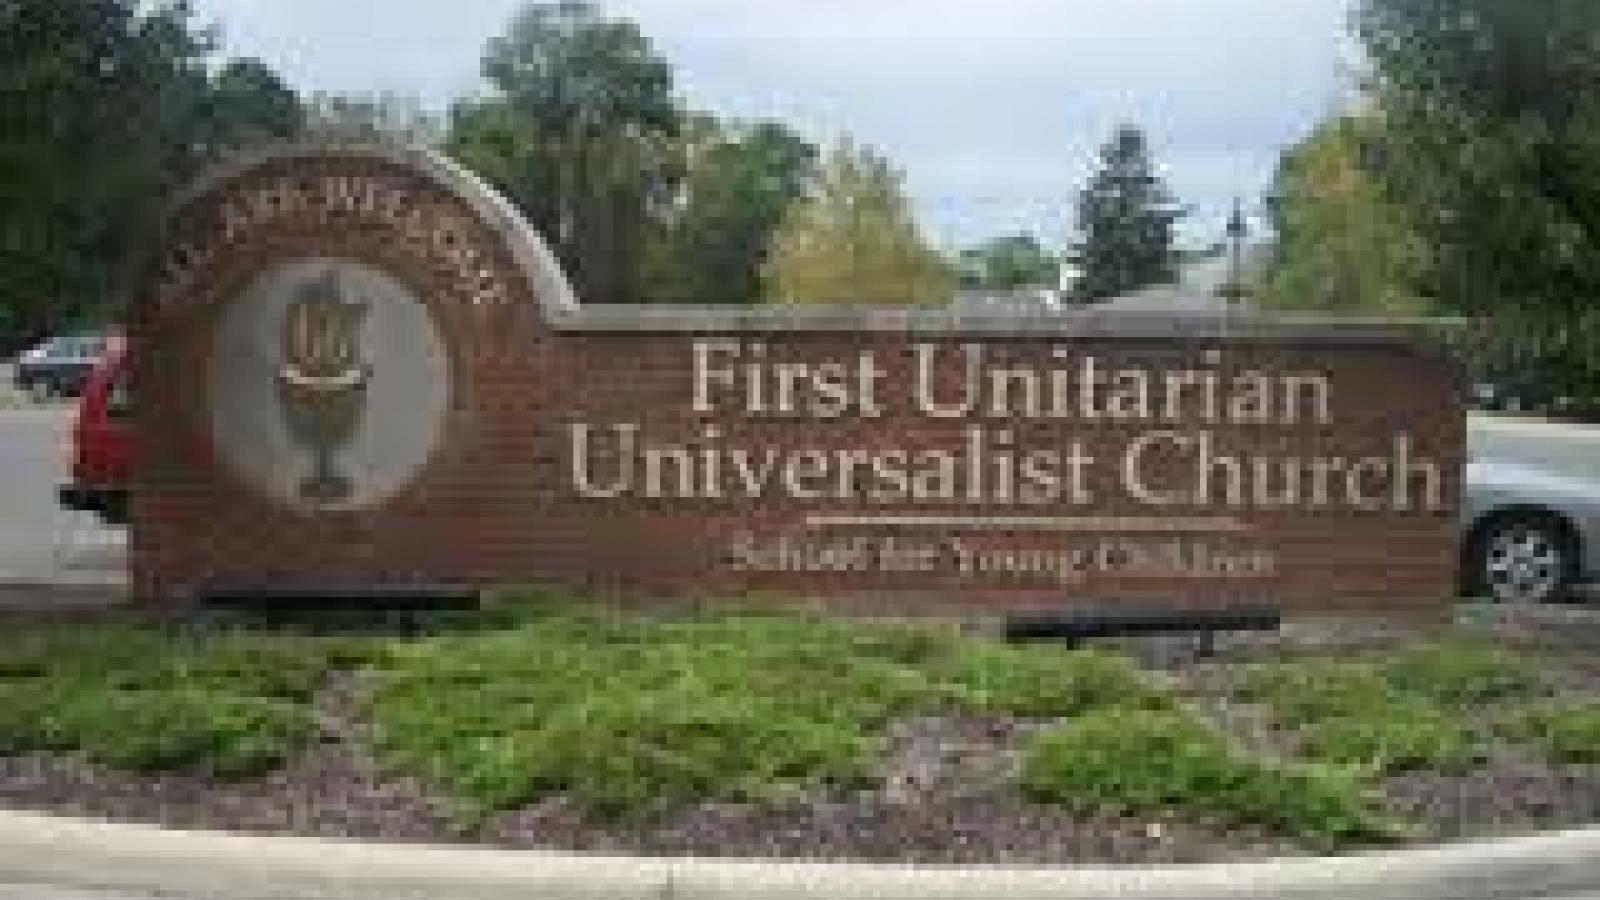 The First Unitarian Universalist Church sign on Weisheimer Rd. in Clintonville